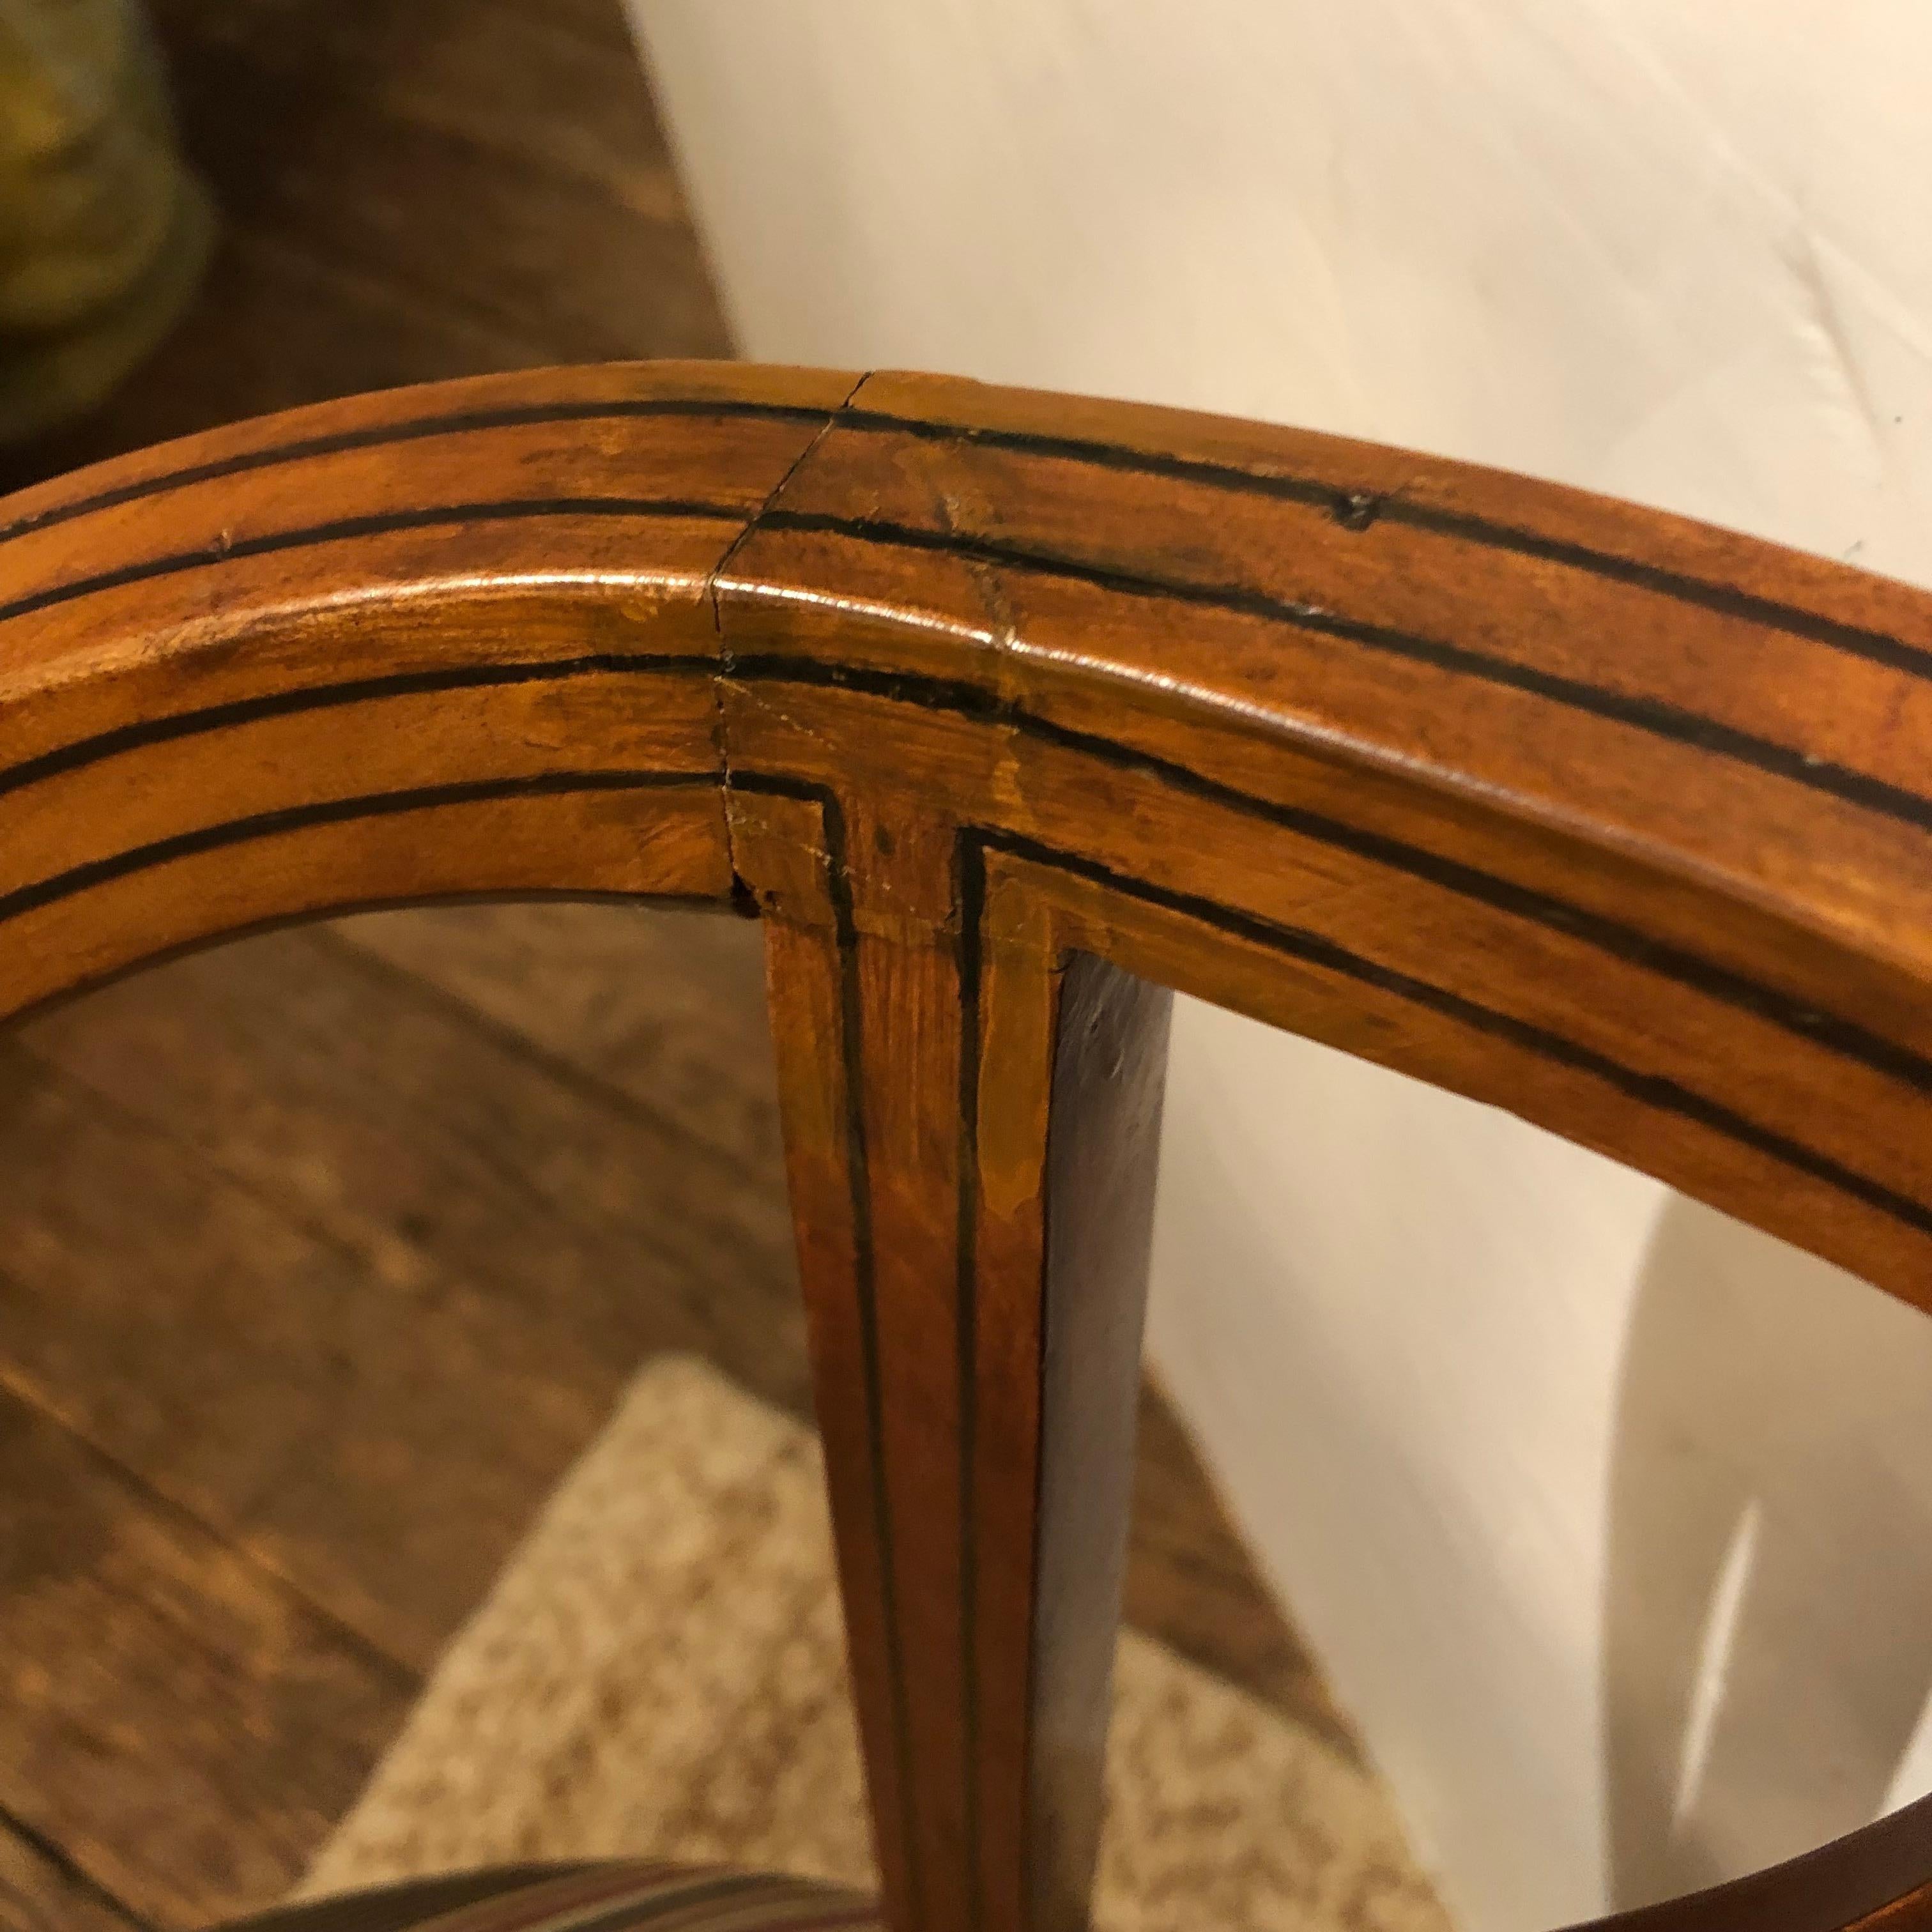 Upholstery Lovely Curved French Fruitwood Inlaid Salon or Desk Chair For Sale